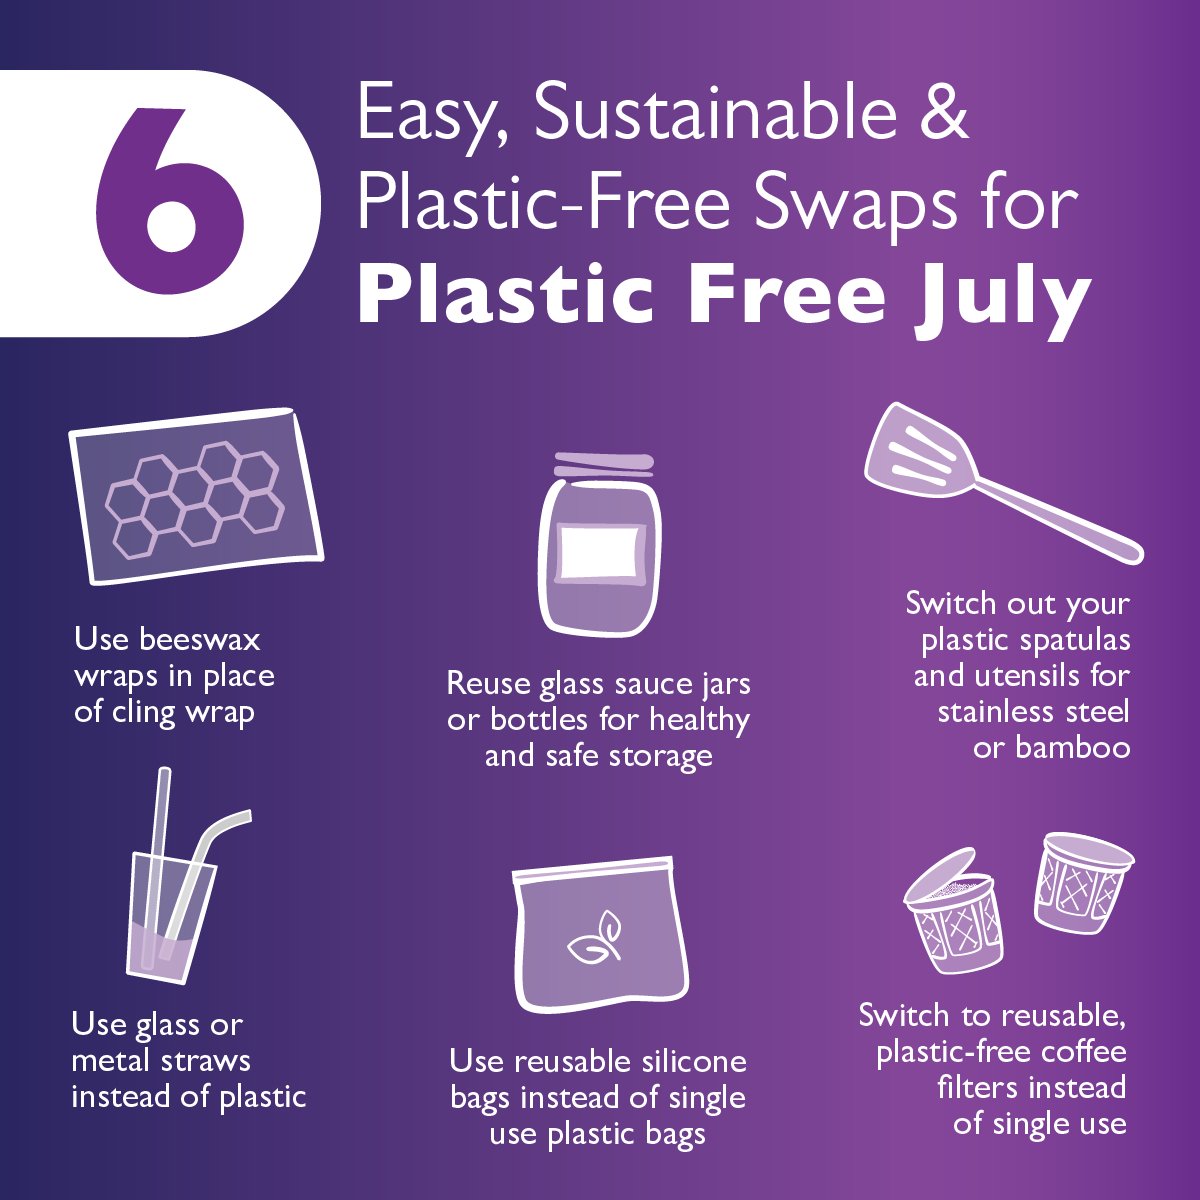 #PlasticFreeJuly may be coming to an end, but reducing your plastic use and waste beyond this month is easy with simple swaps. #Sustainability #EcoFriendly #EarthFocus #ChooseGlass